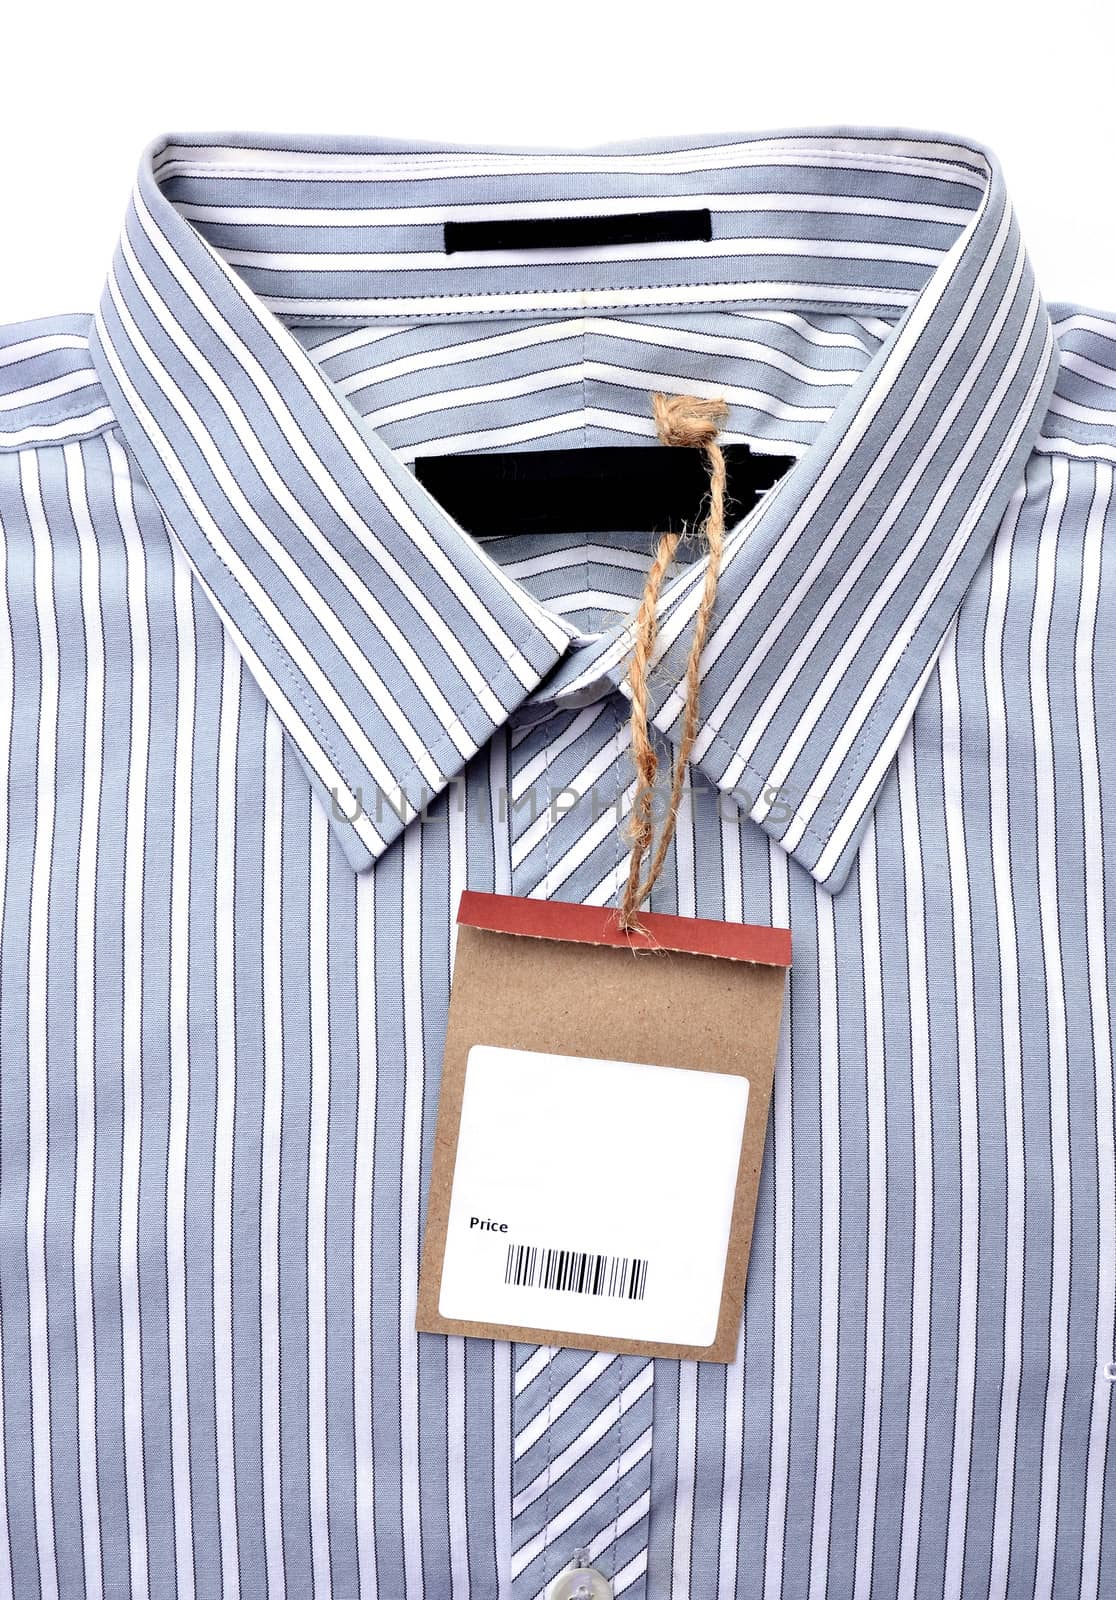 new shirt with price tag